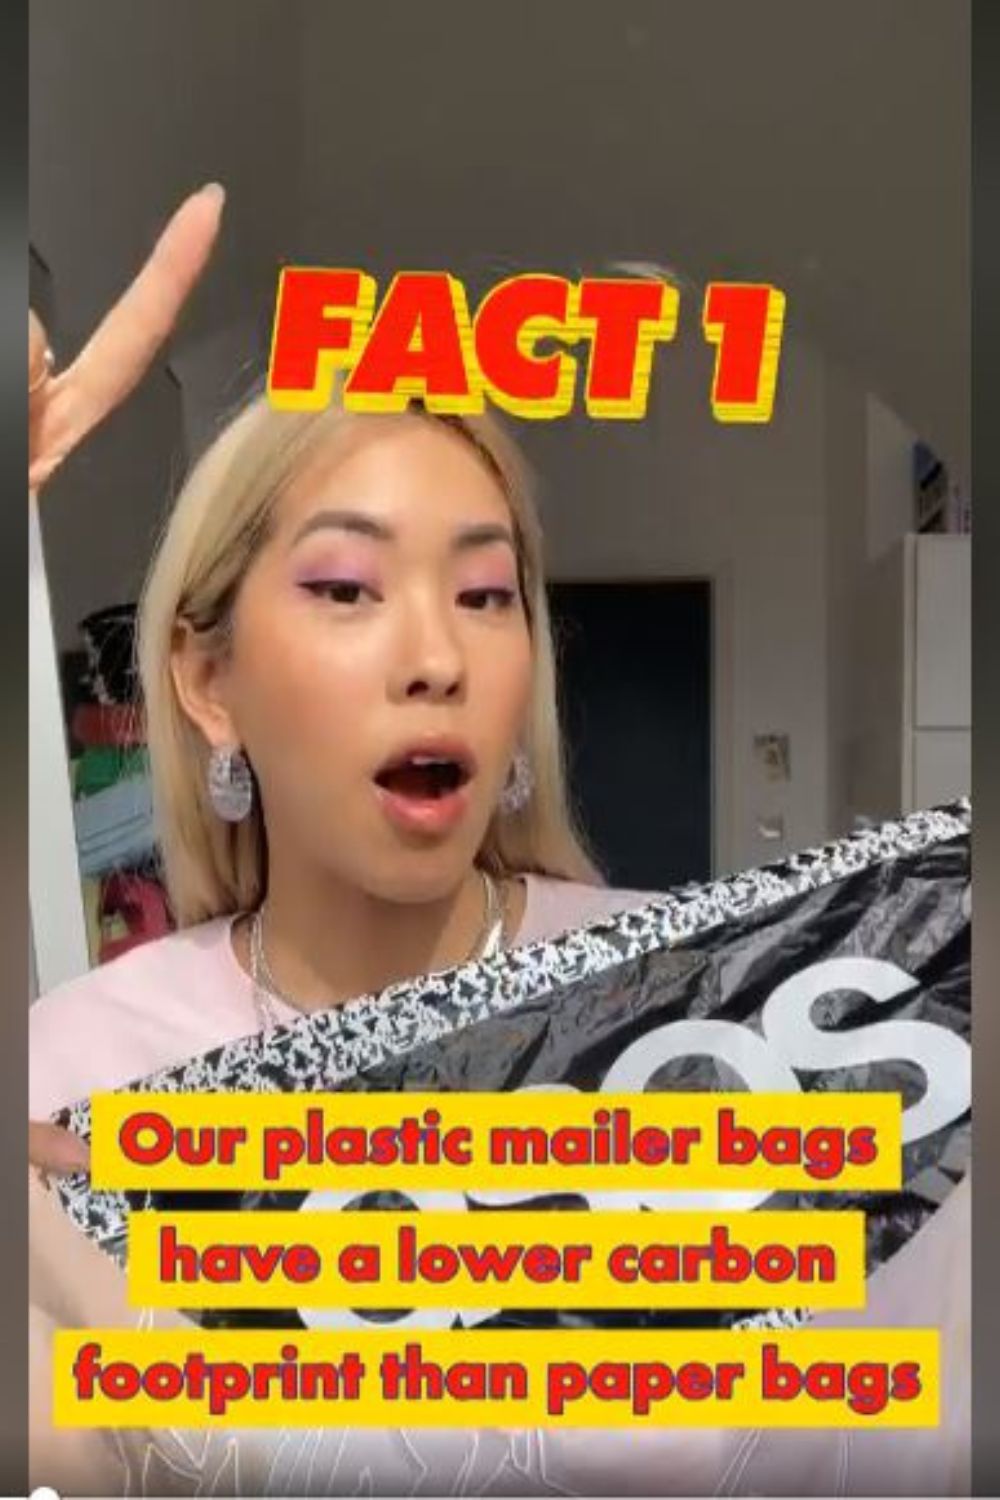 ASOS woman describing their plastic mailing bags have a lower carbon footprint than paper bags